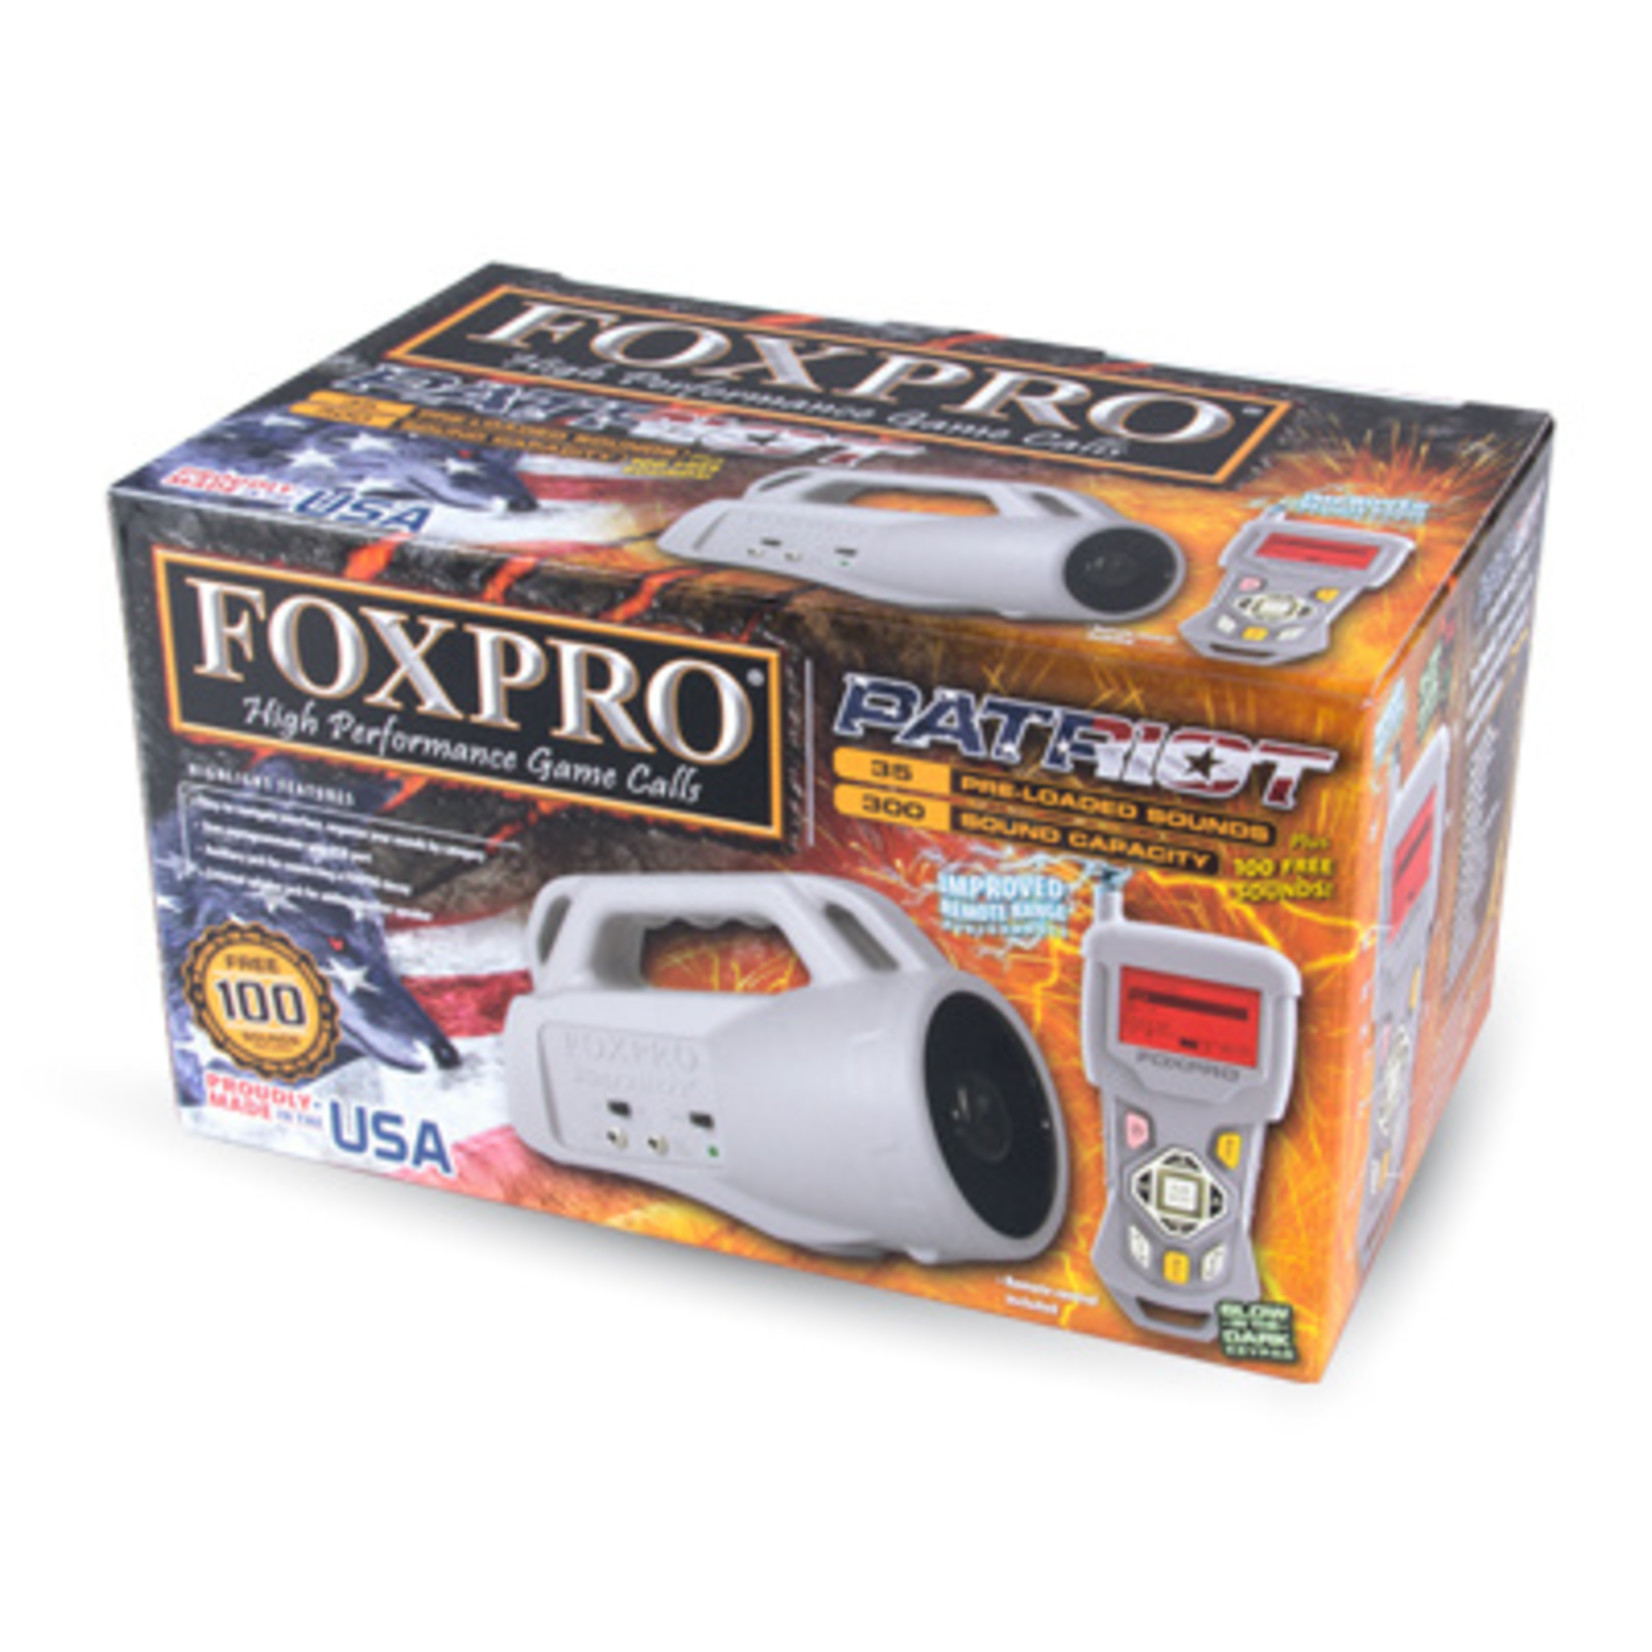 FOXPRO SYSTEMS PATRIOT W/TX433 TRANSMITTER